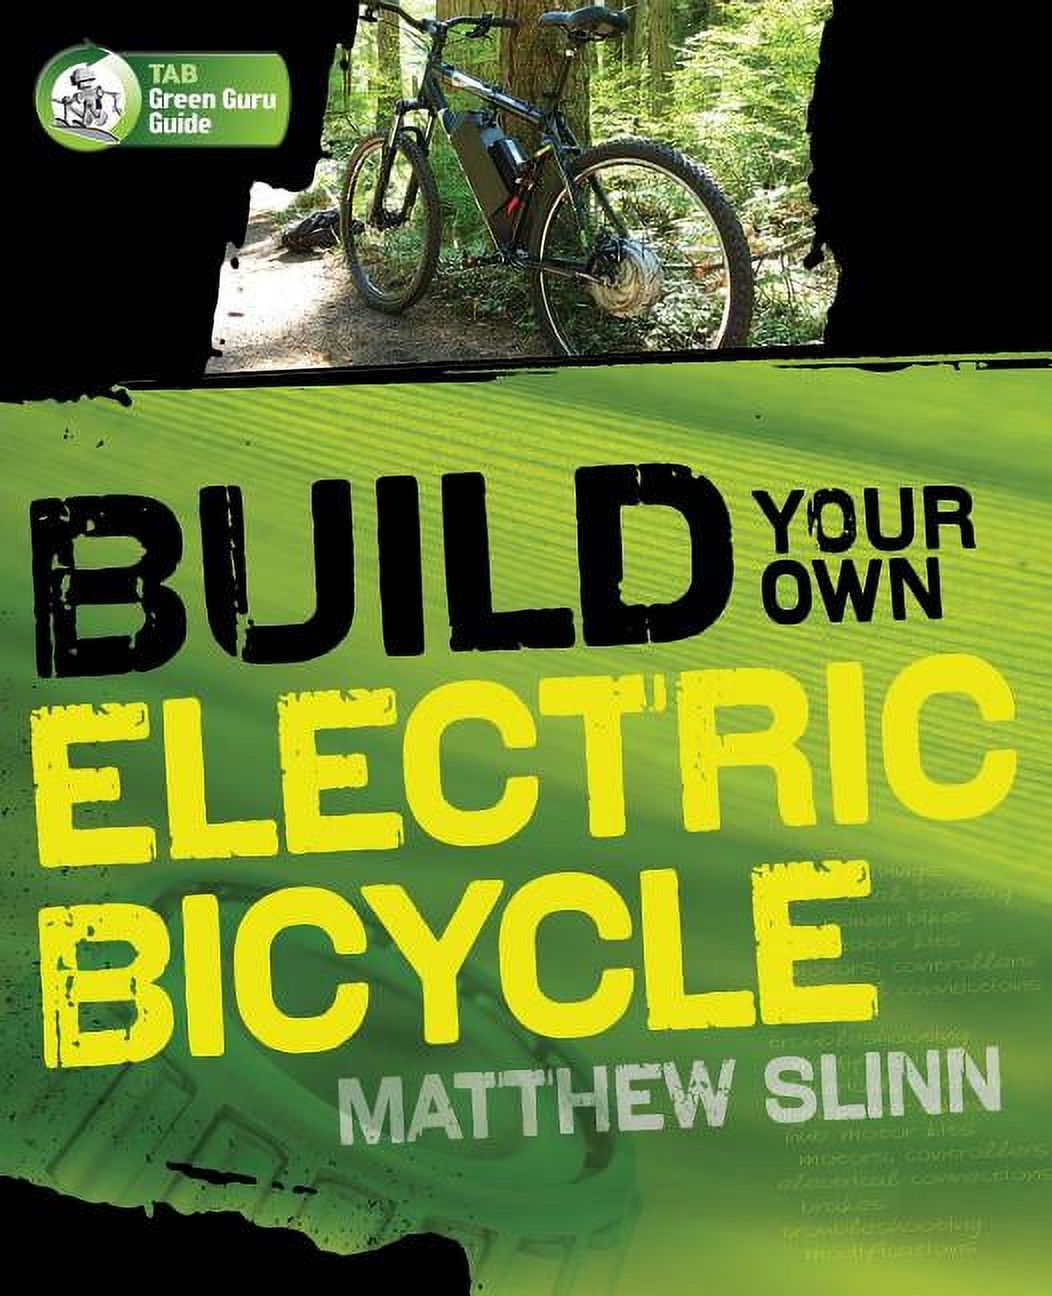 TAB Green Guru Guides: Build Your Own Electric Bicycle (Paperback) - image 1 of 1